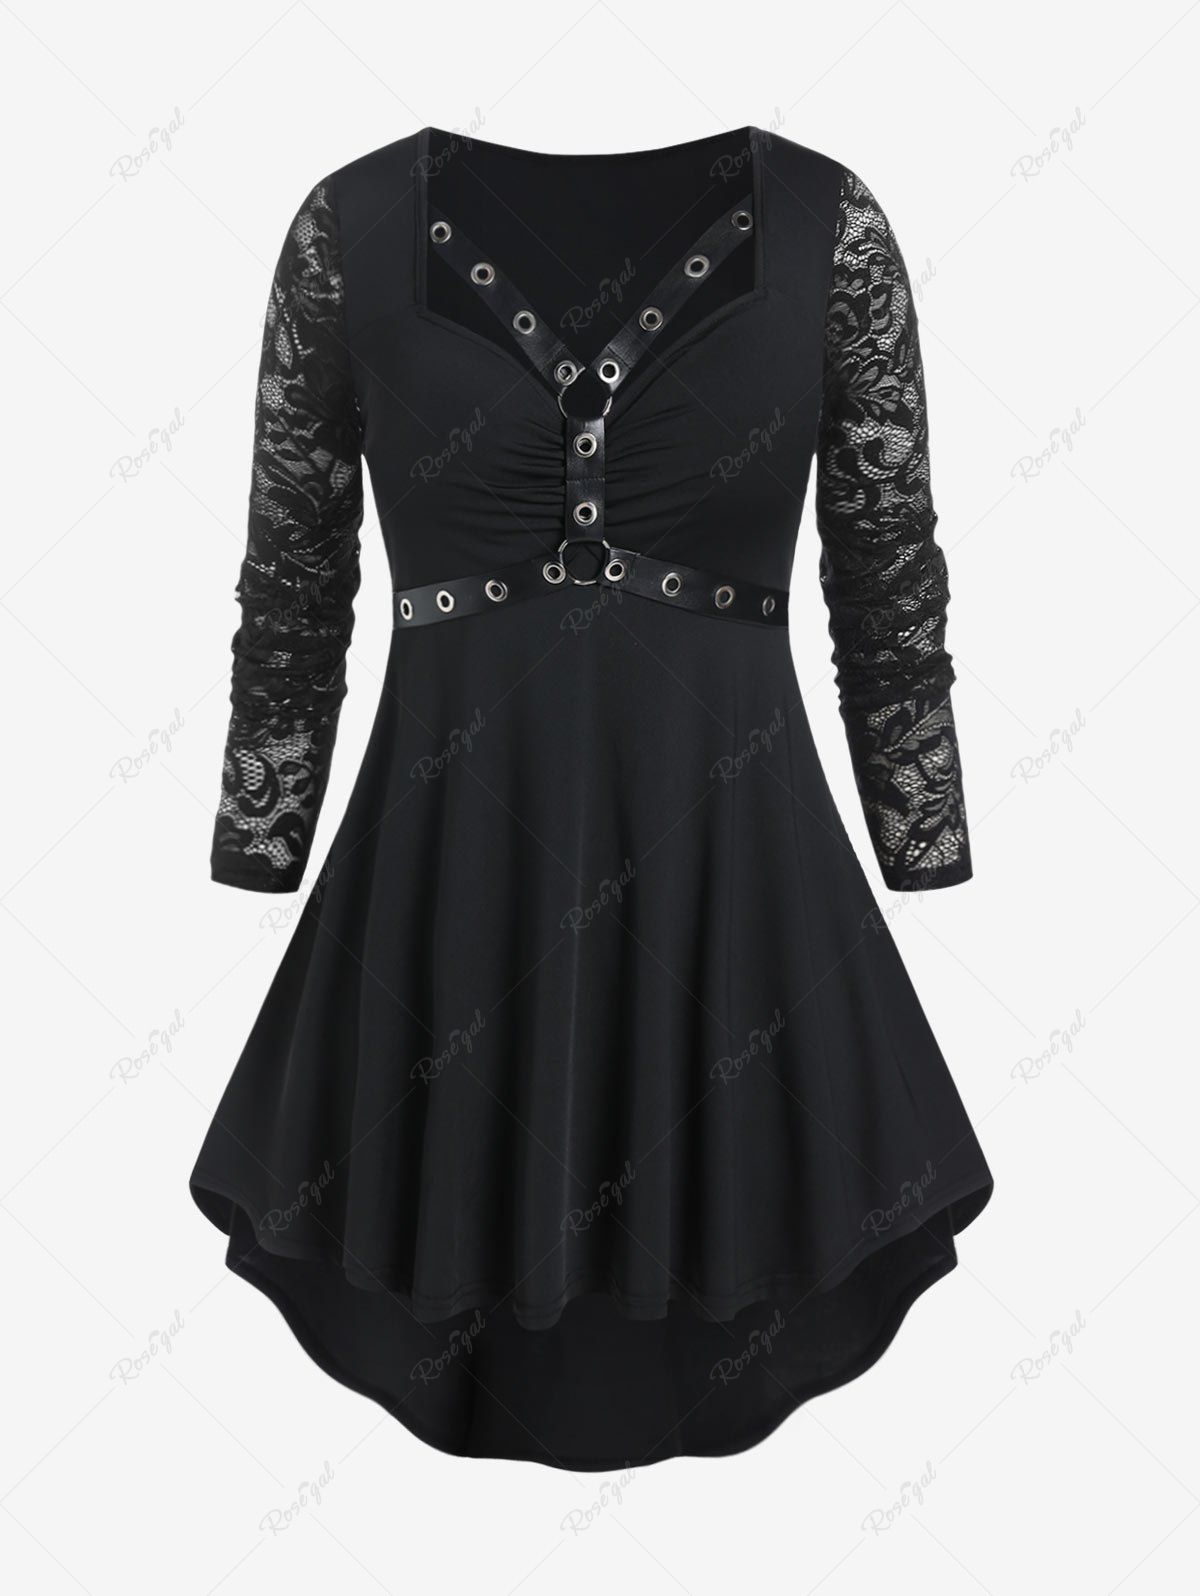 Store Gothic Lace Sleeve Harness Grommets High Low Tee  